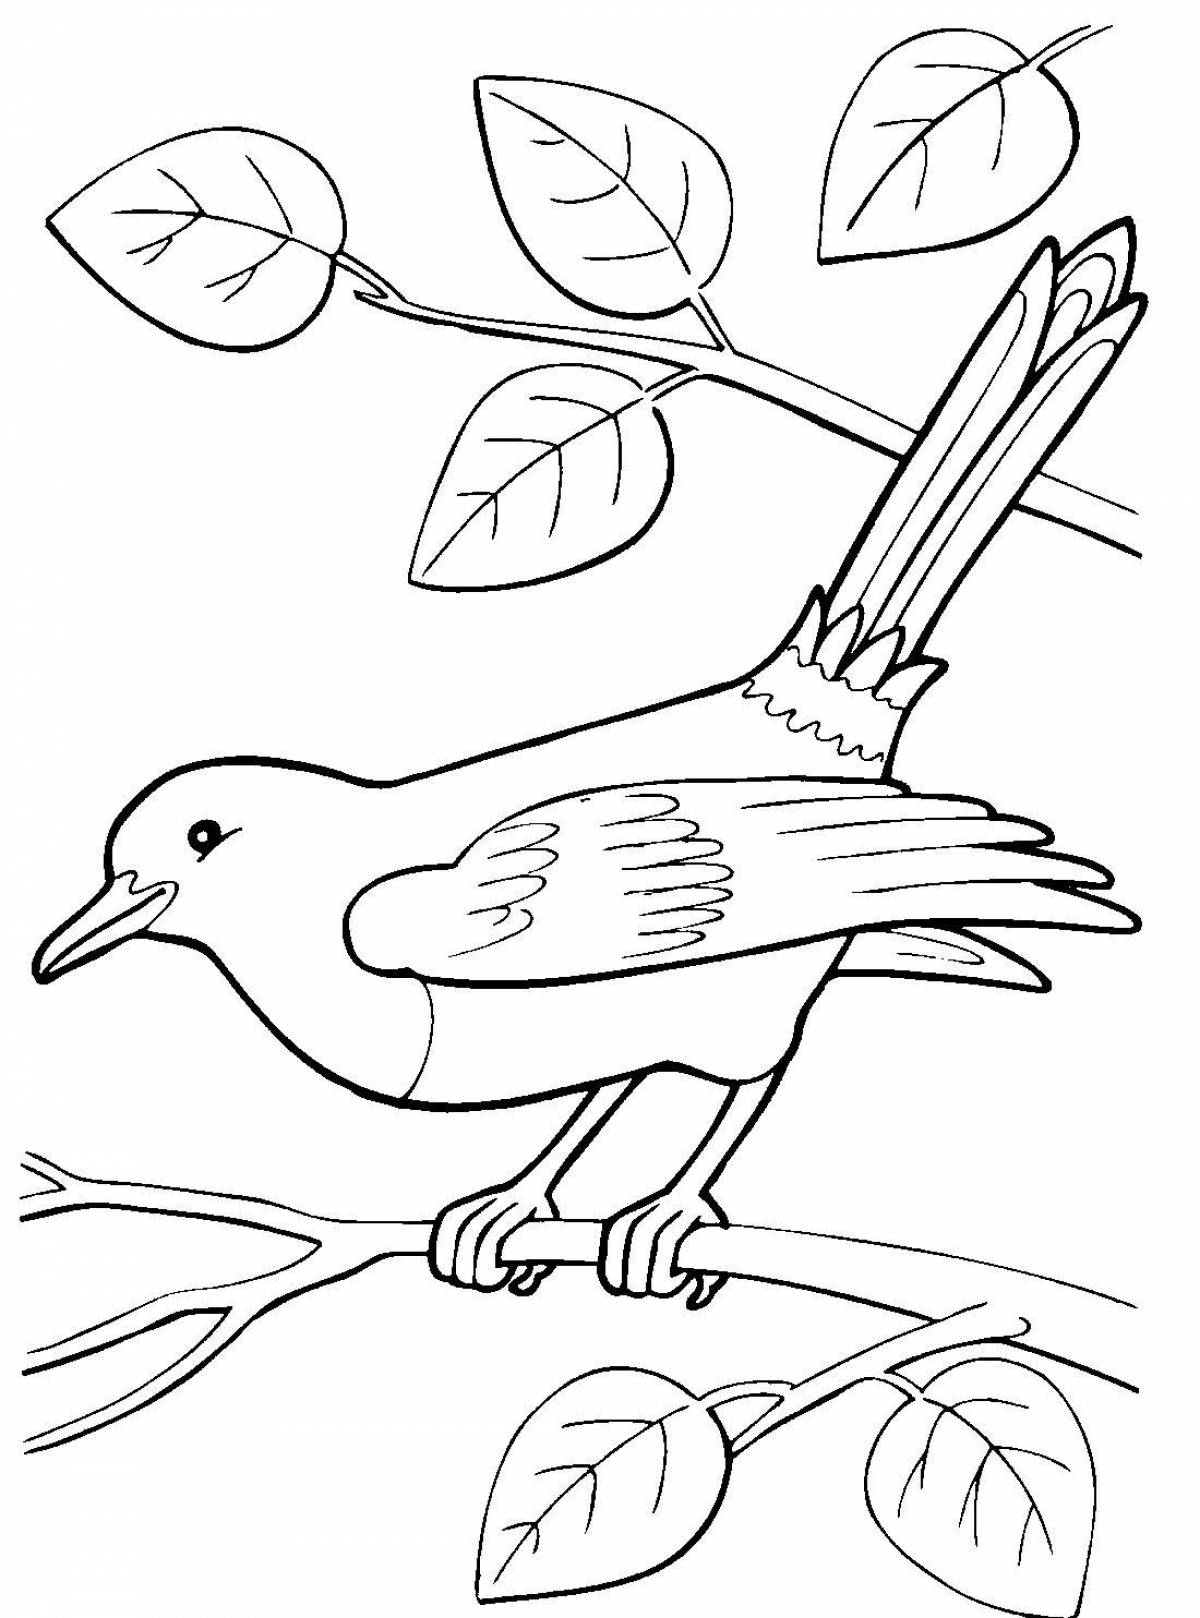 Playful winter birds coloring book for kids